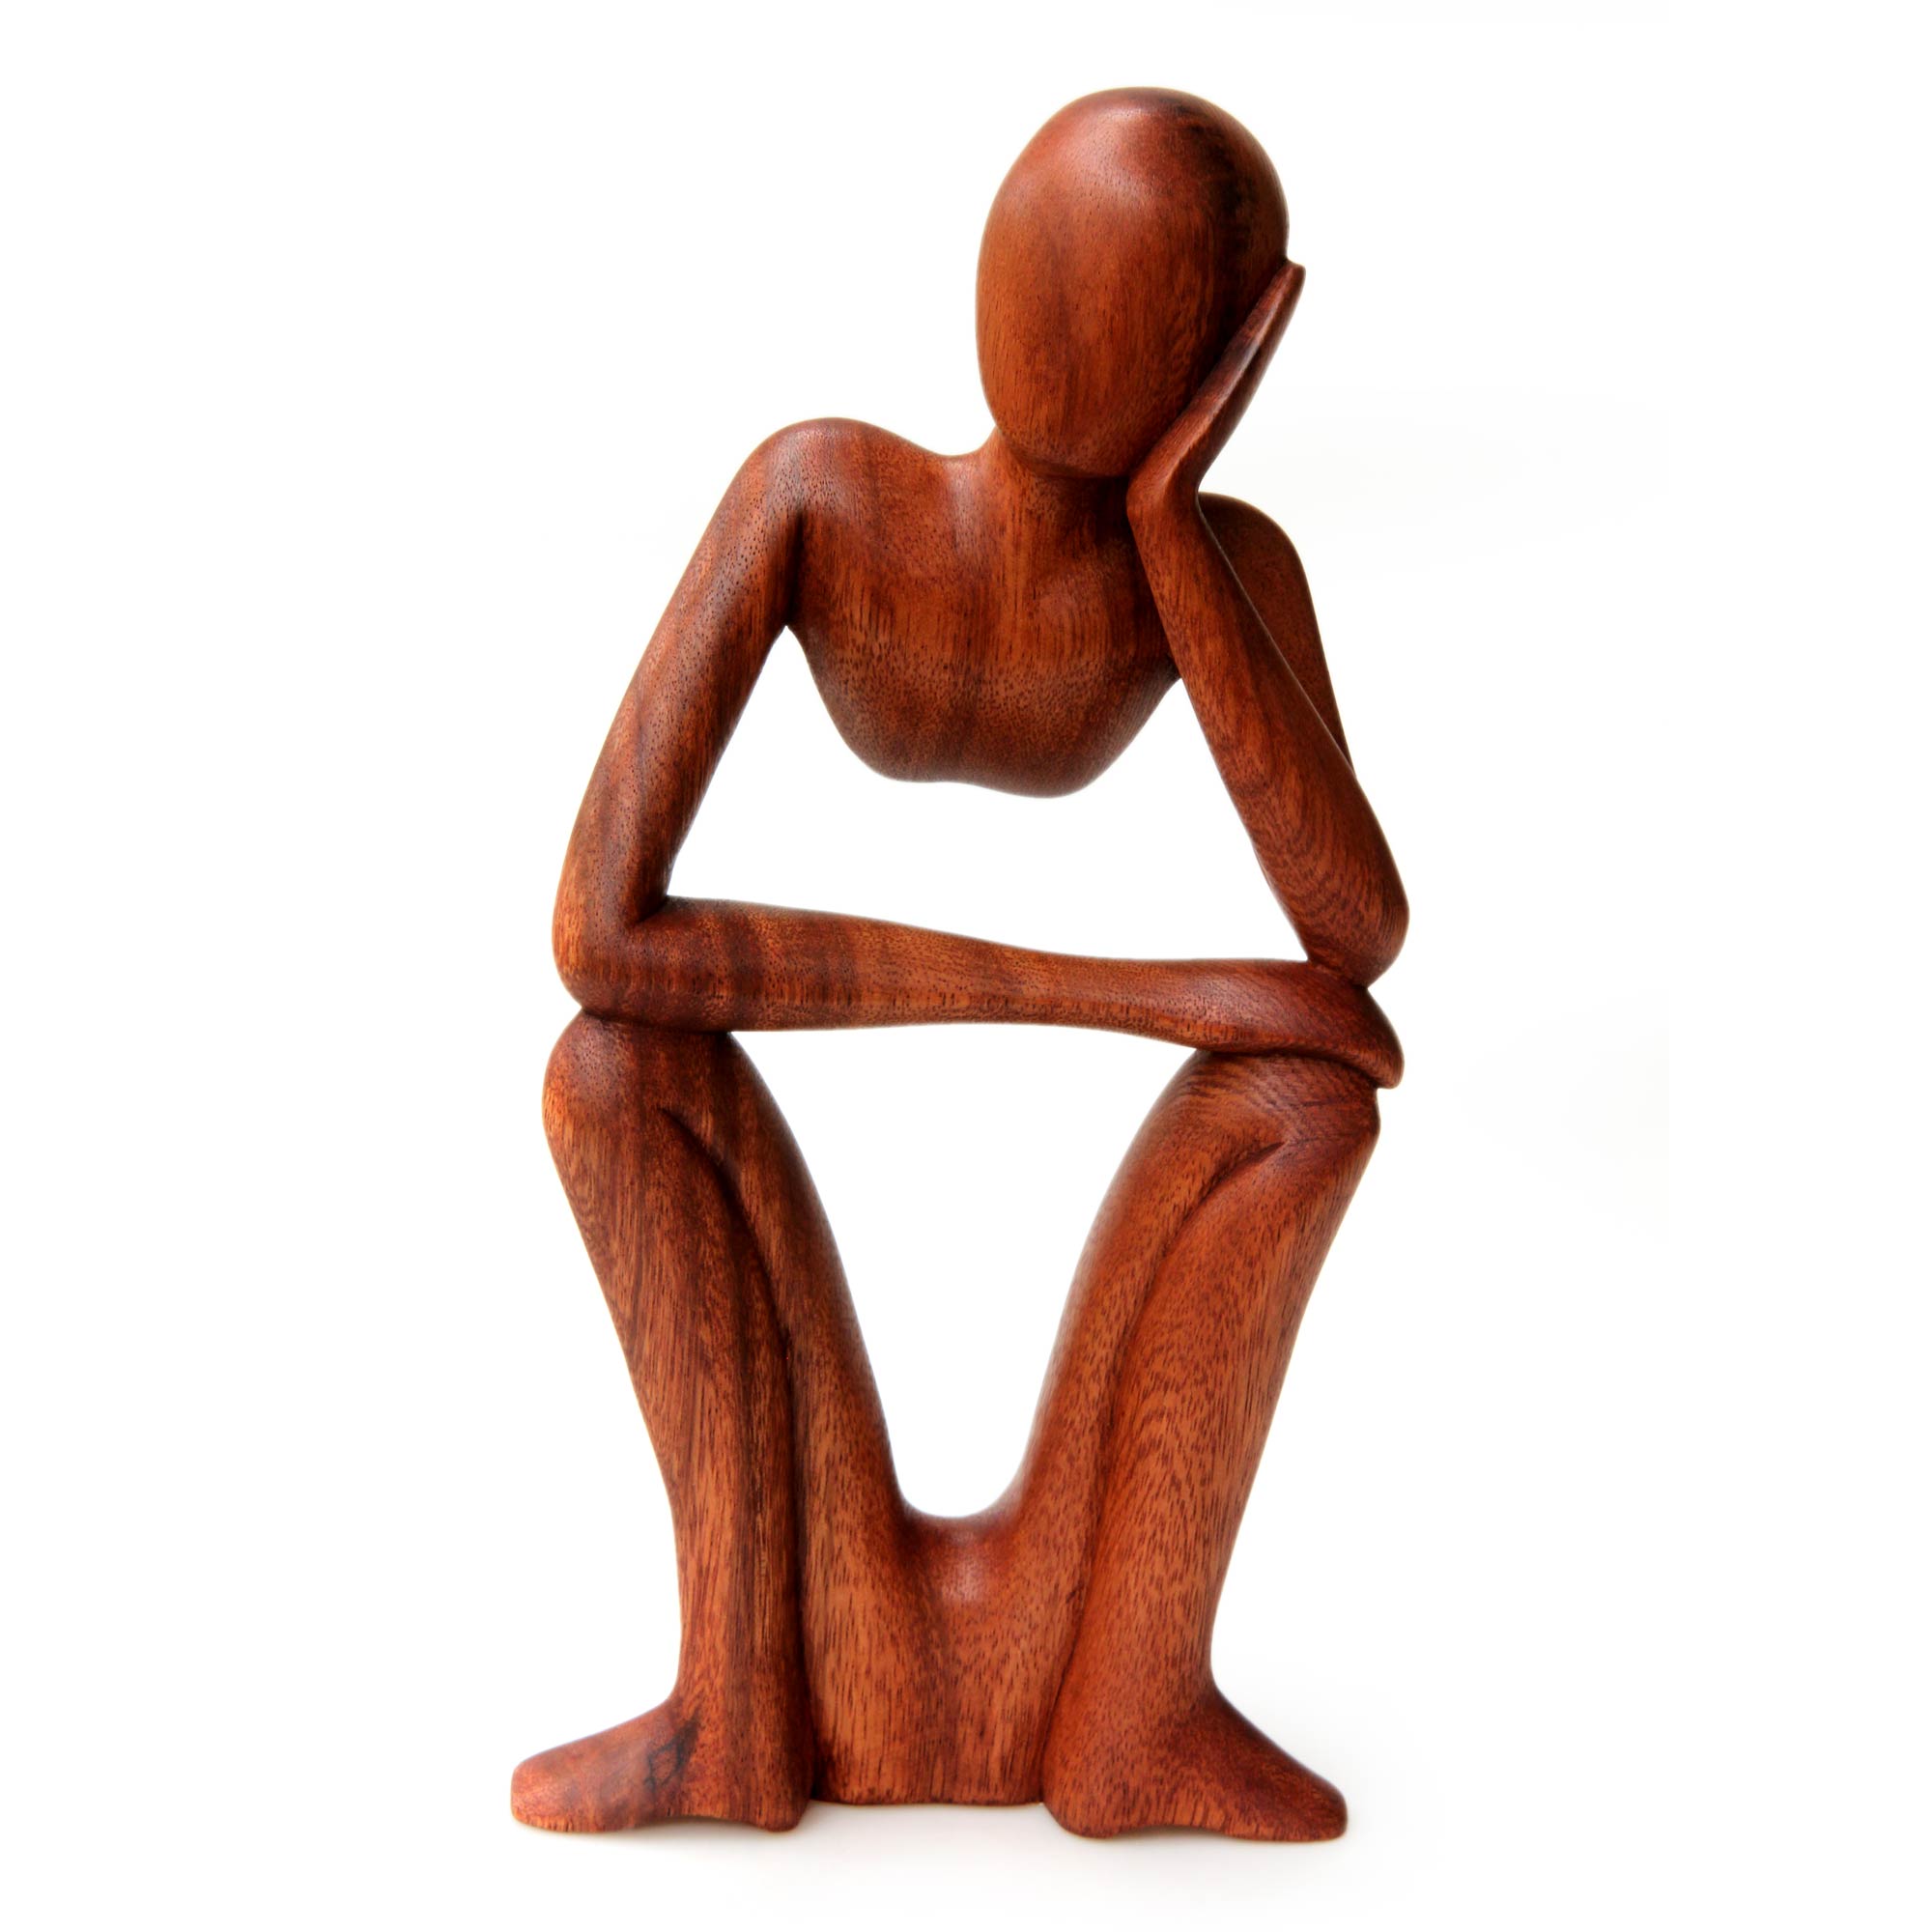 Handcrafted Indonesian Wood Sculpture - Thinking of You | NOVICA